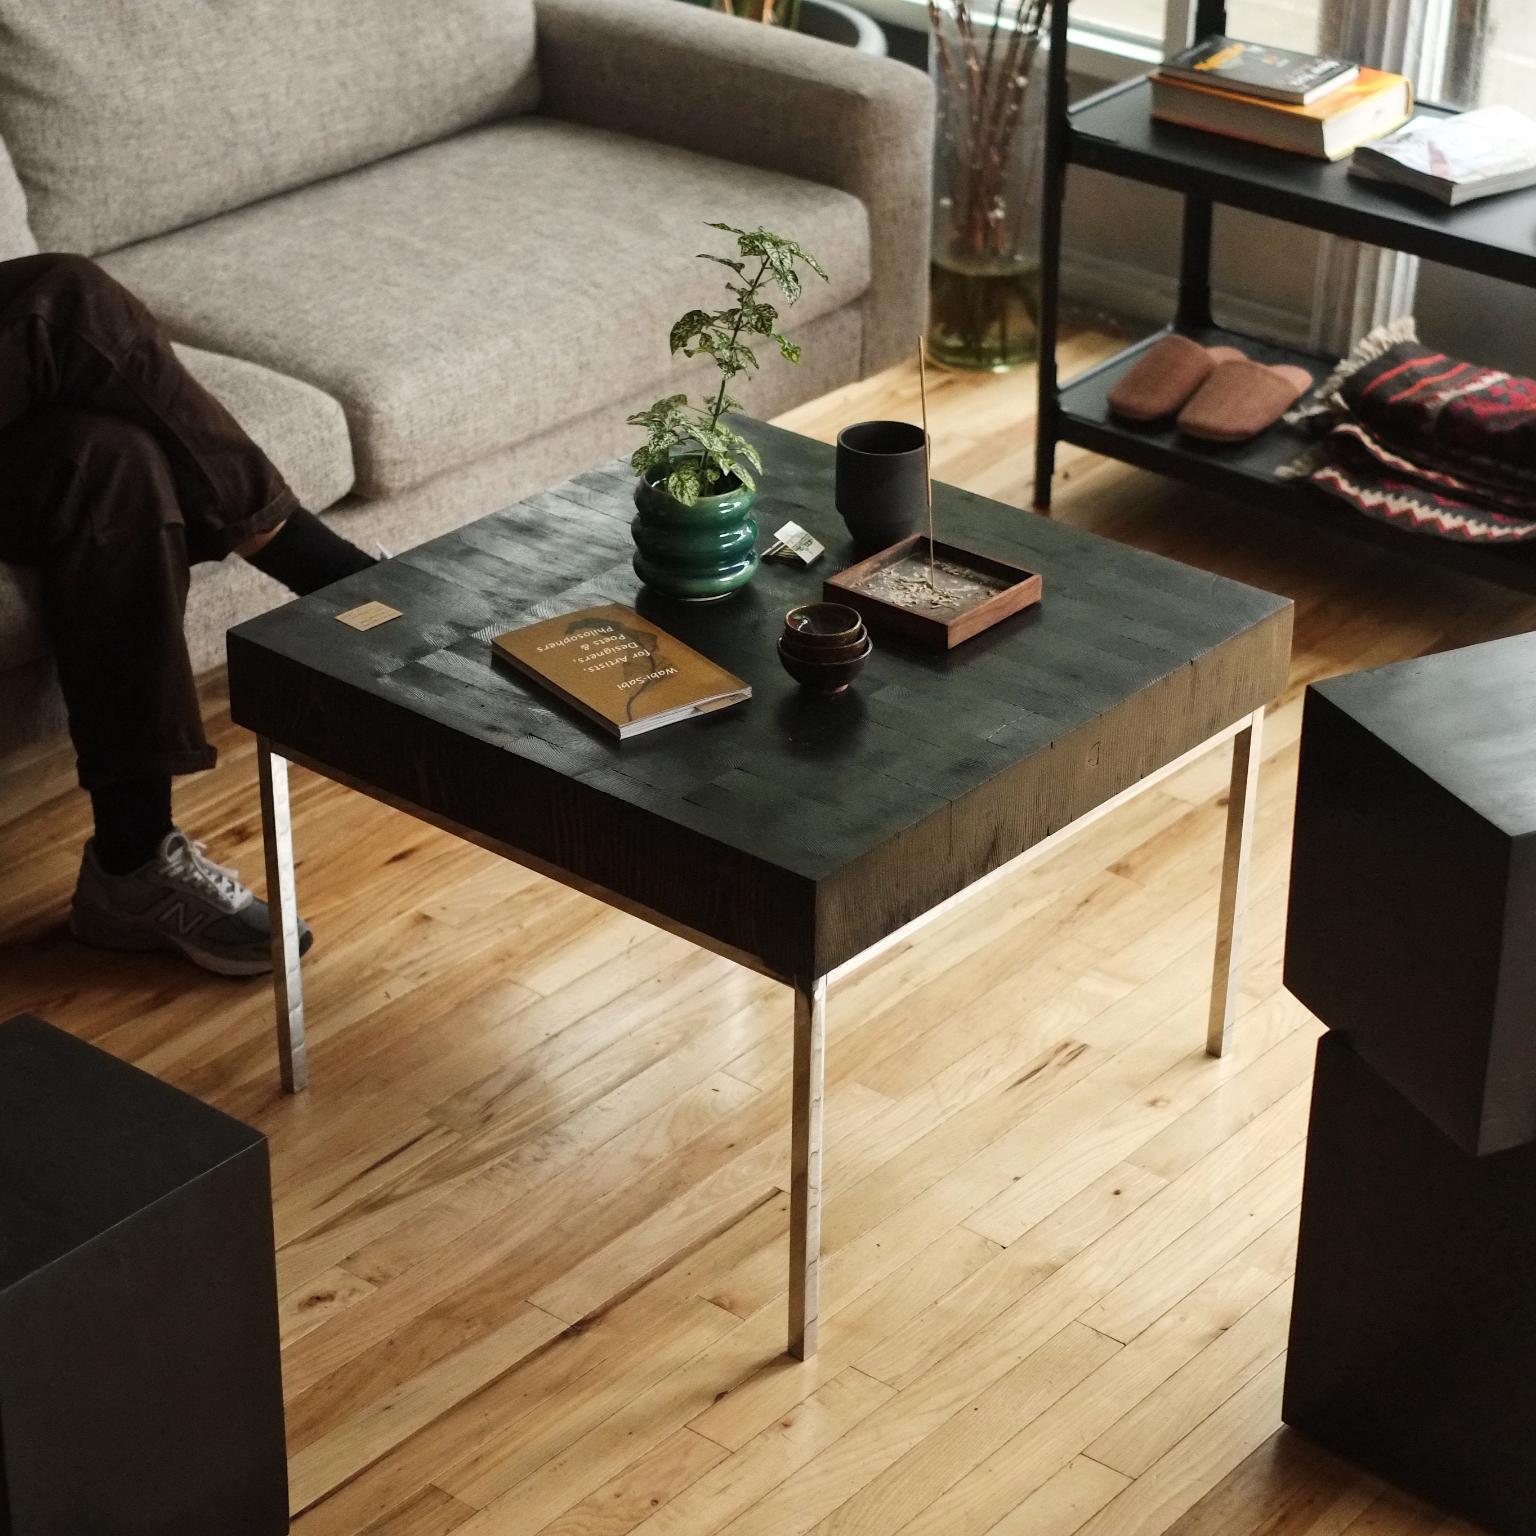 The Fleur Noir coffee table is a haptic sculpture. The coffee table's top is a 'butcher block' style heavy slab of blocks of pine.
Each end grain piece exposes a kerf cut to the table's surface top to the senses of touch and sight. The select